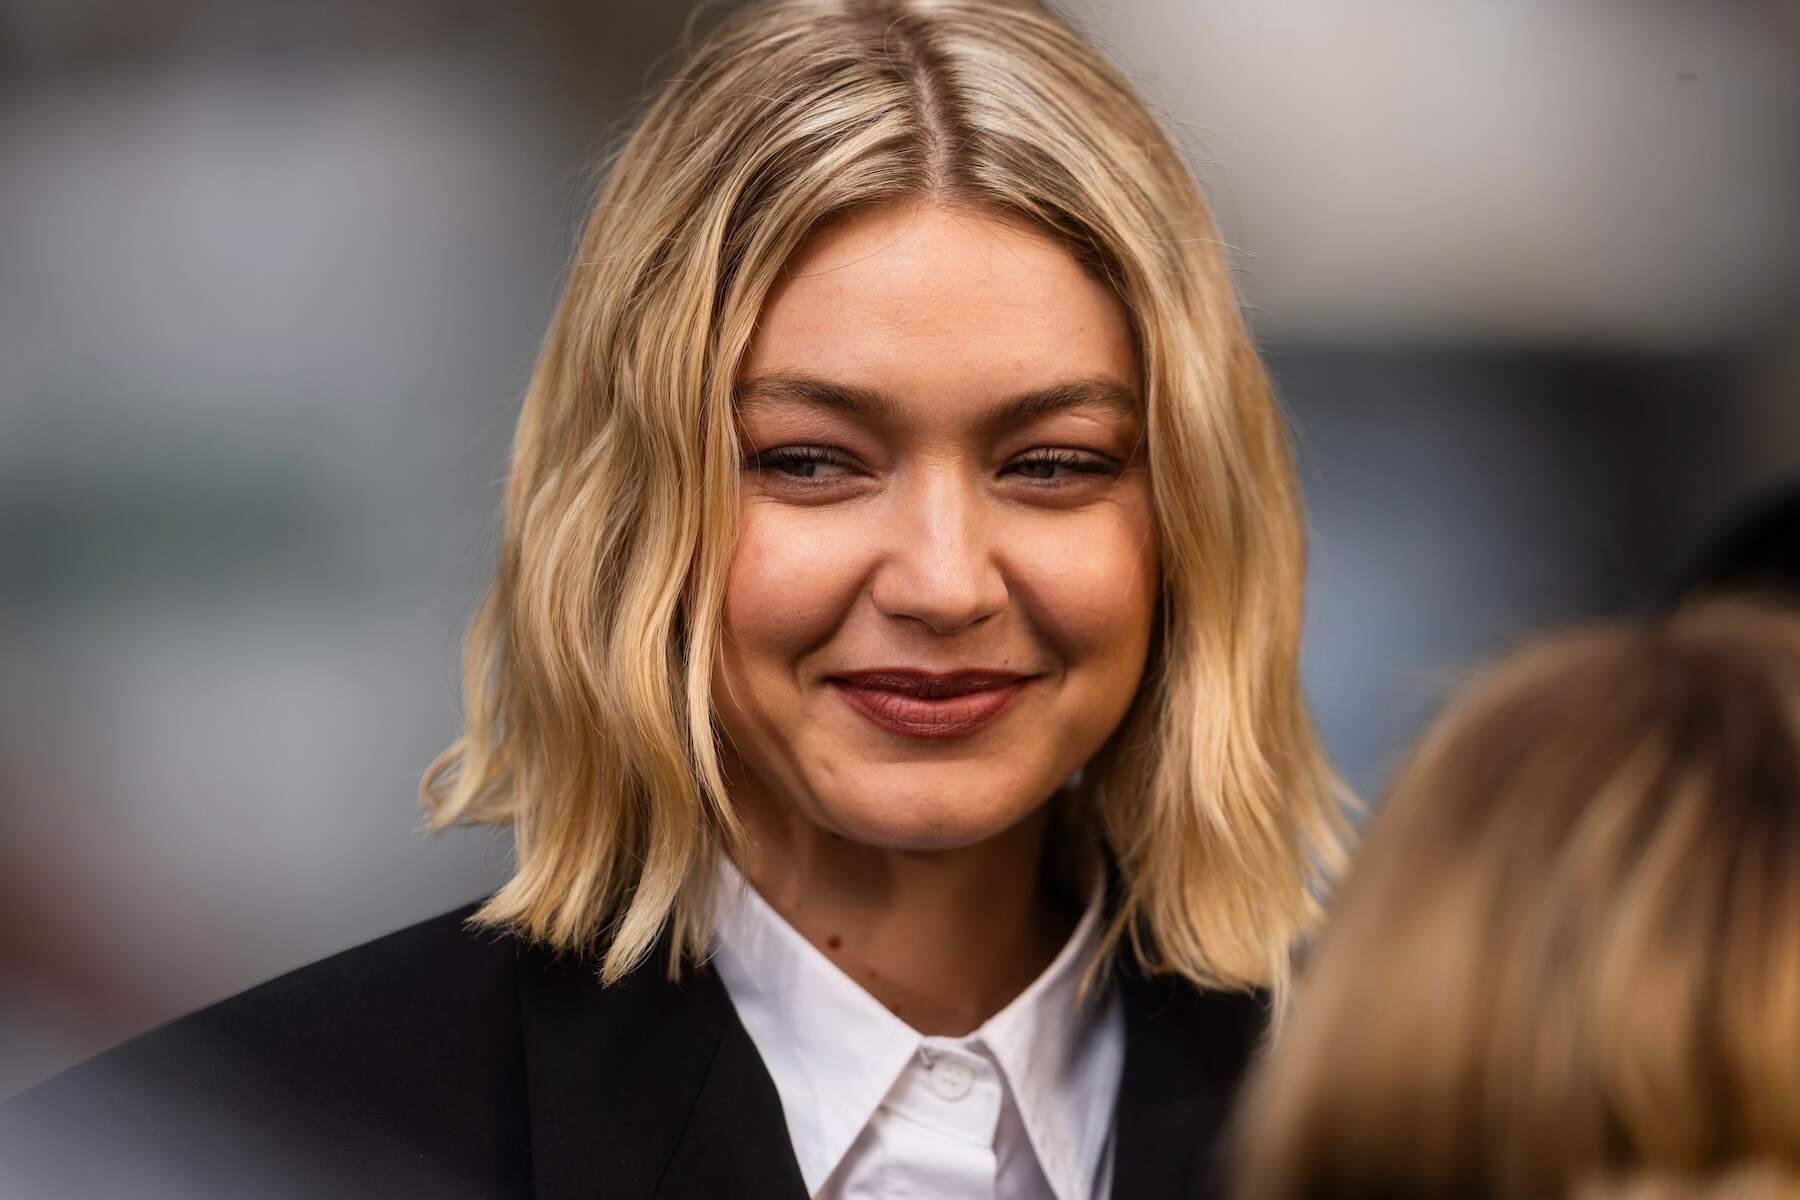 Gigi Hadid Stops Traffic for NYC Photoshoot; See Her Flawless Looks Post-Date Night With Bradley Cooper